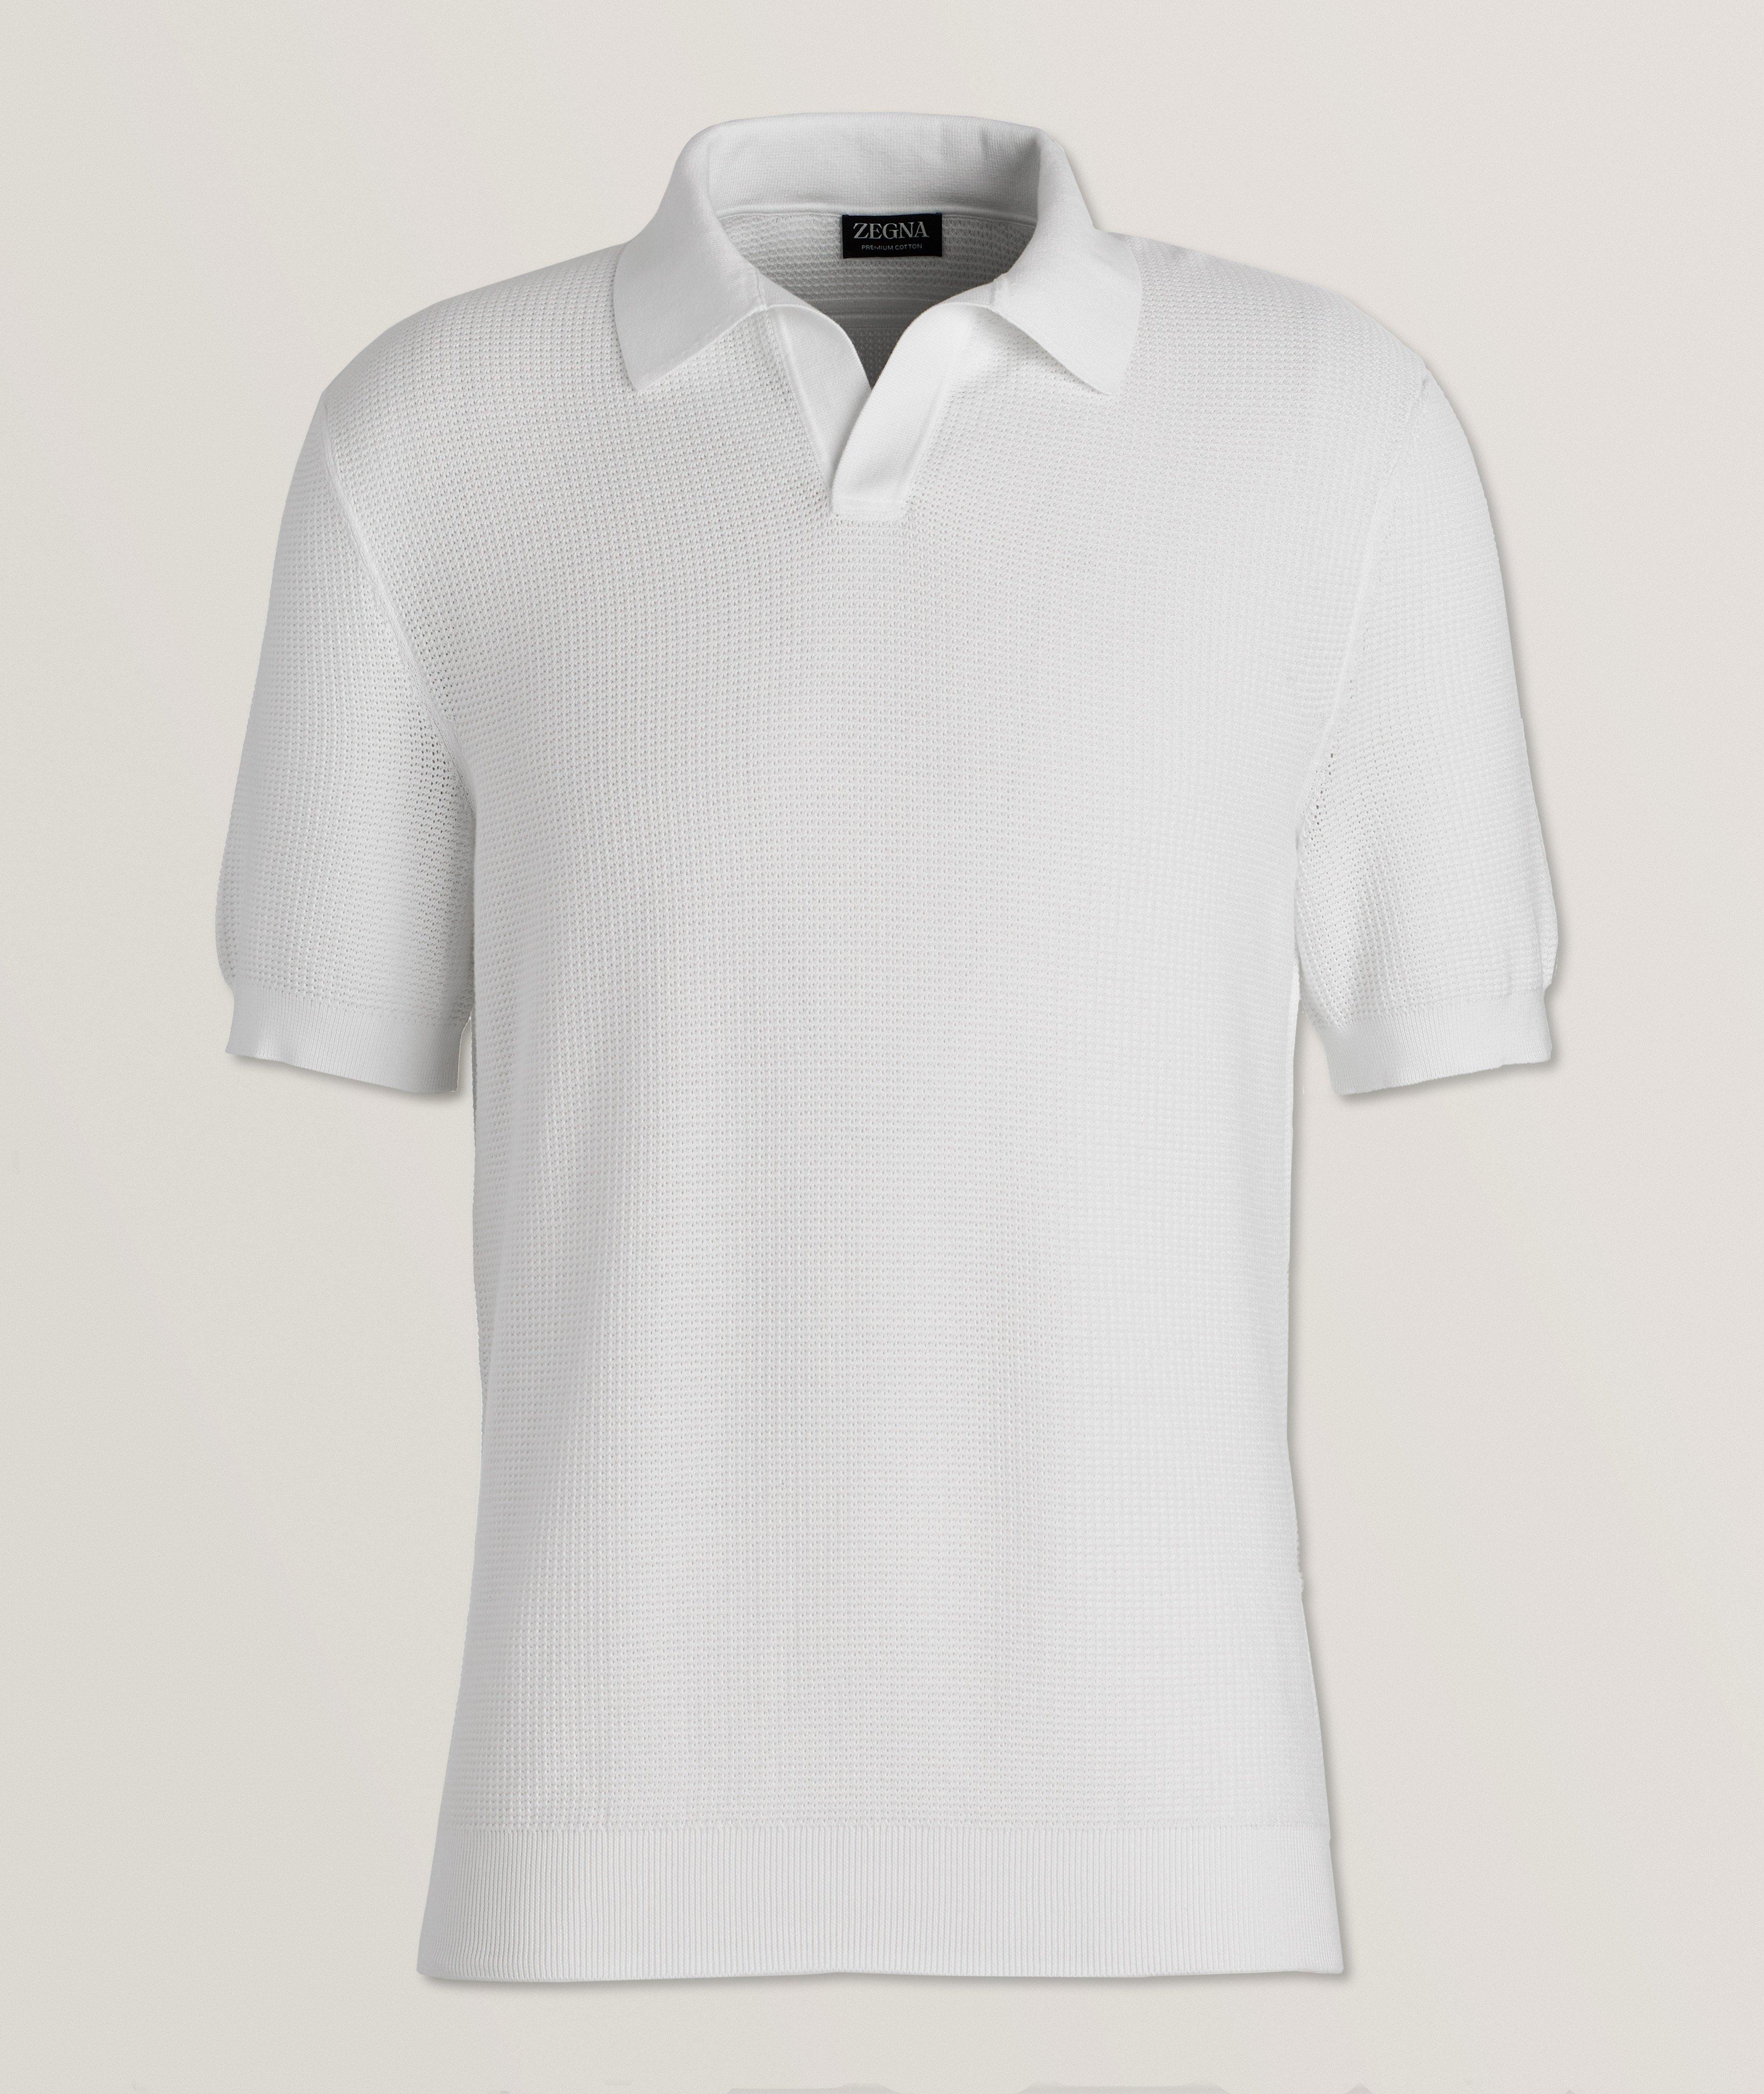 Premium Cotton Knitted Polo  image 0